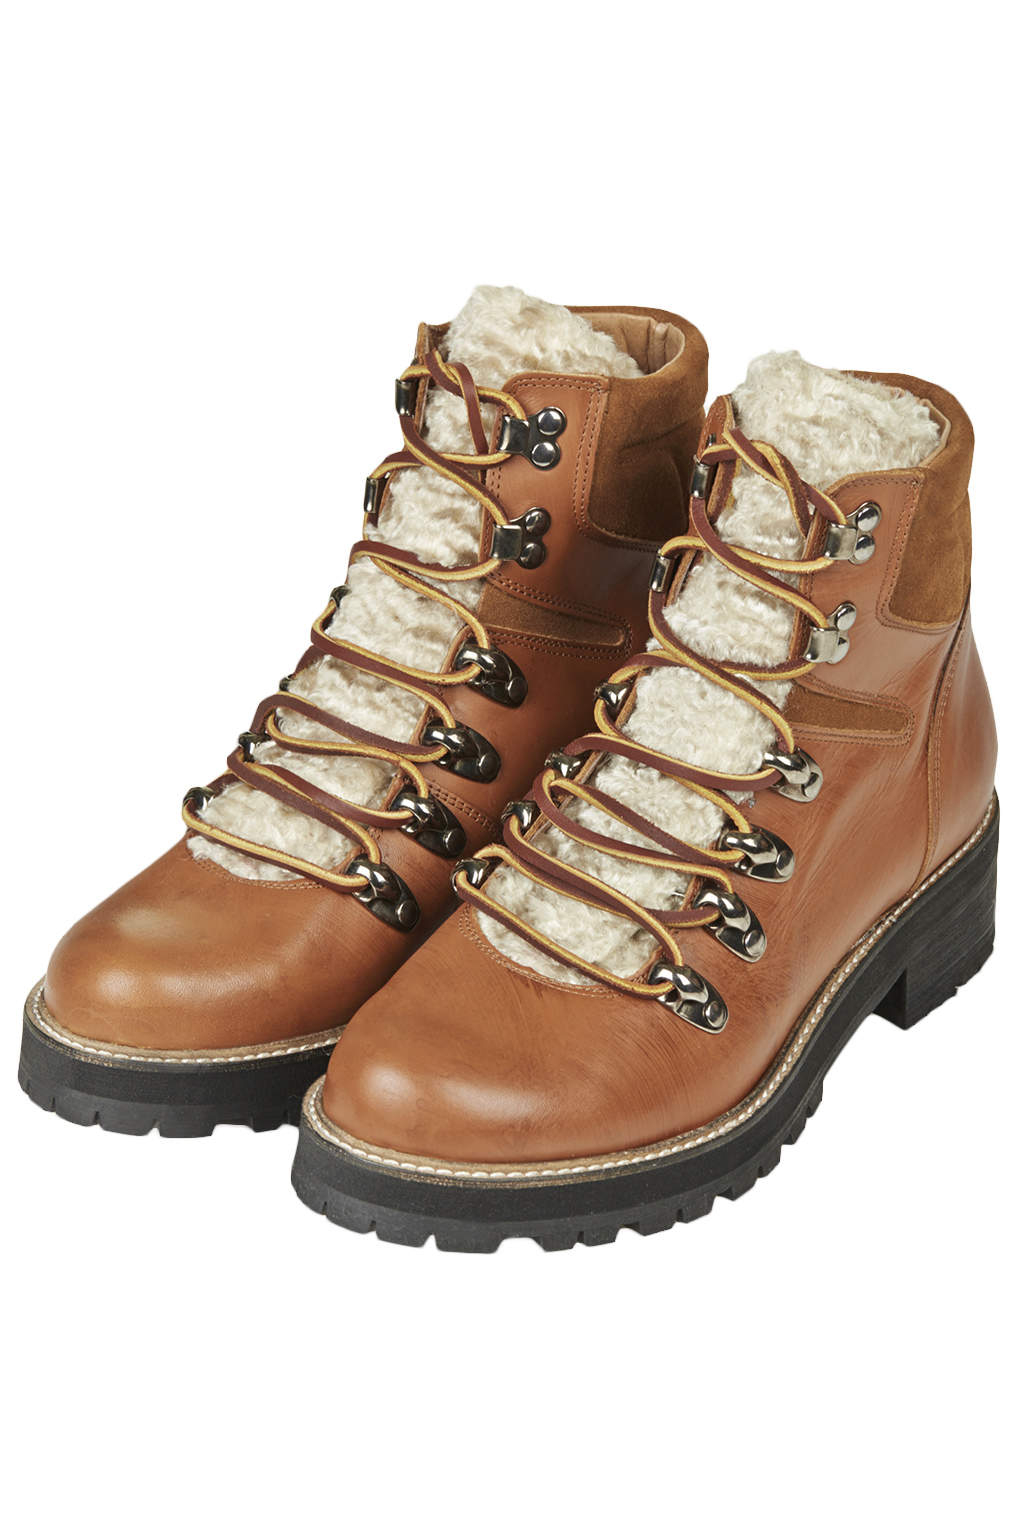 ahoy tan boots lace womens brown topshop lyst